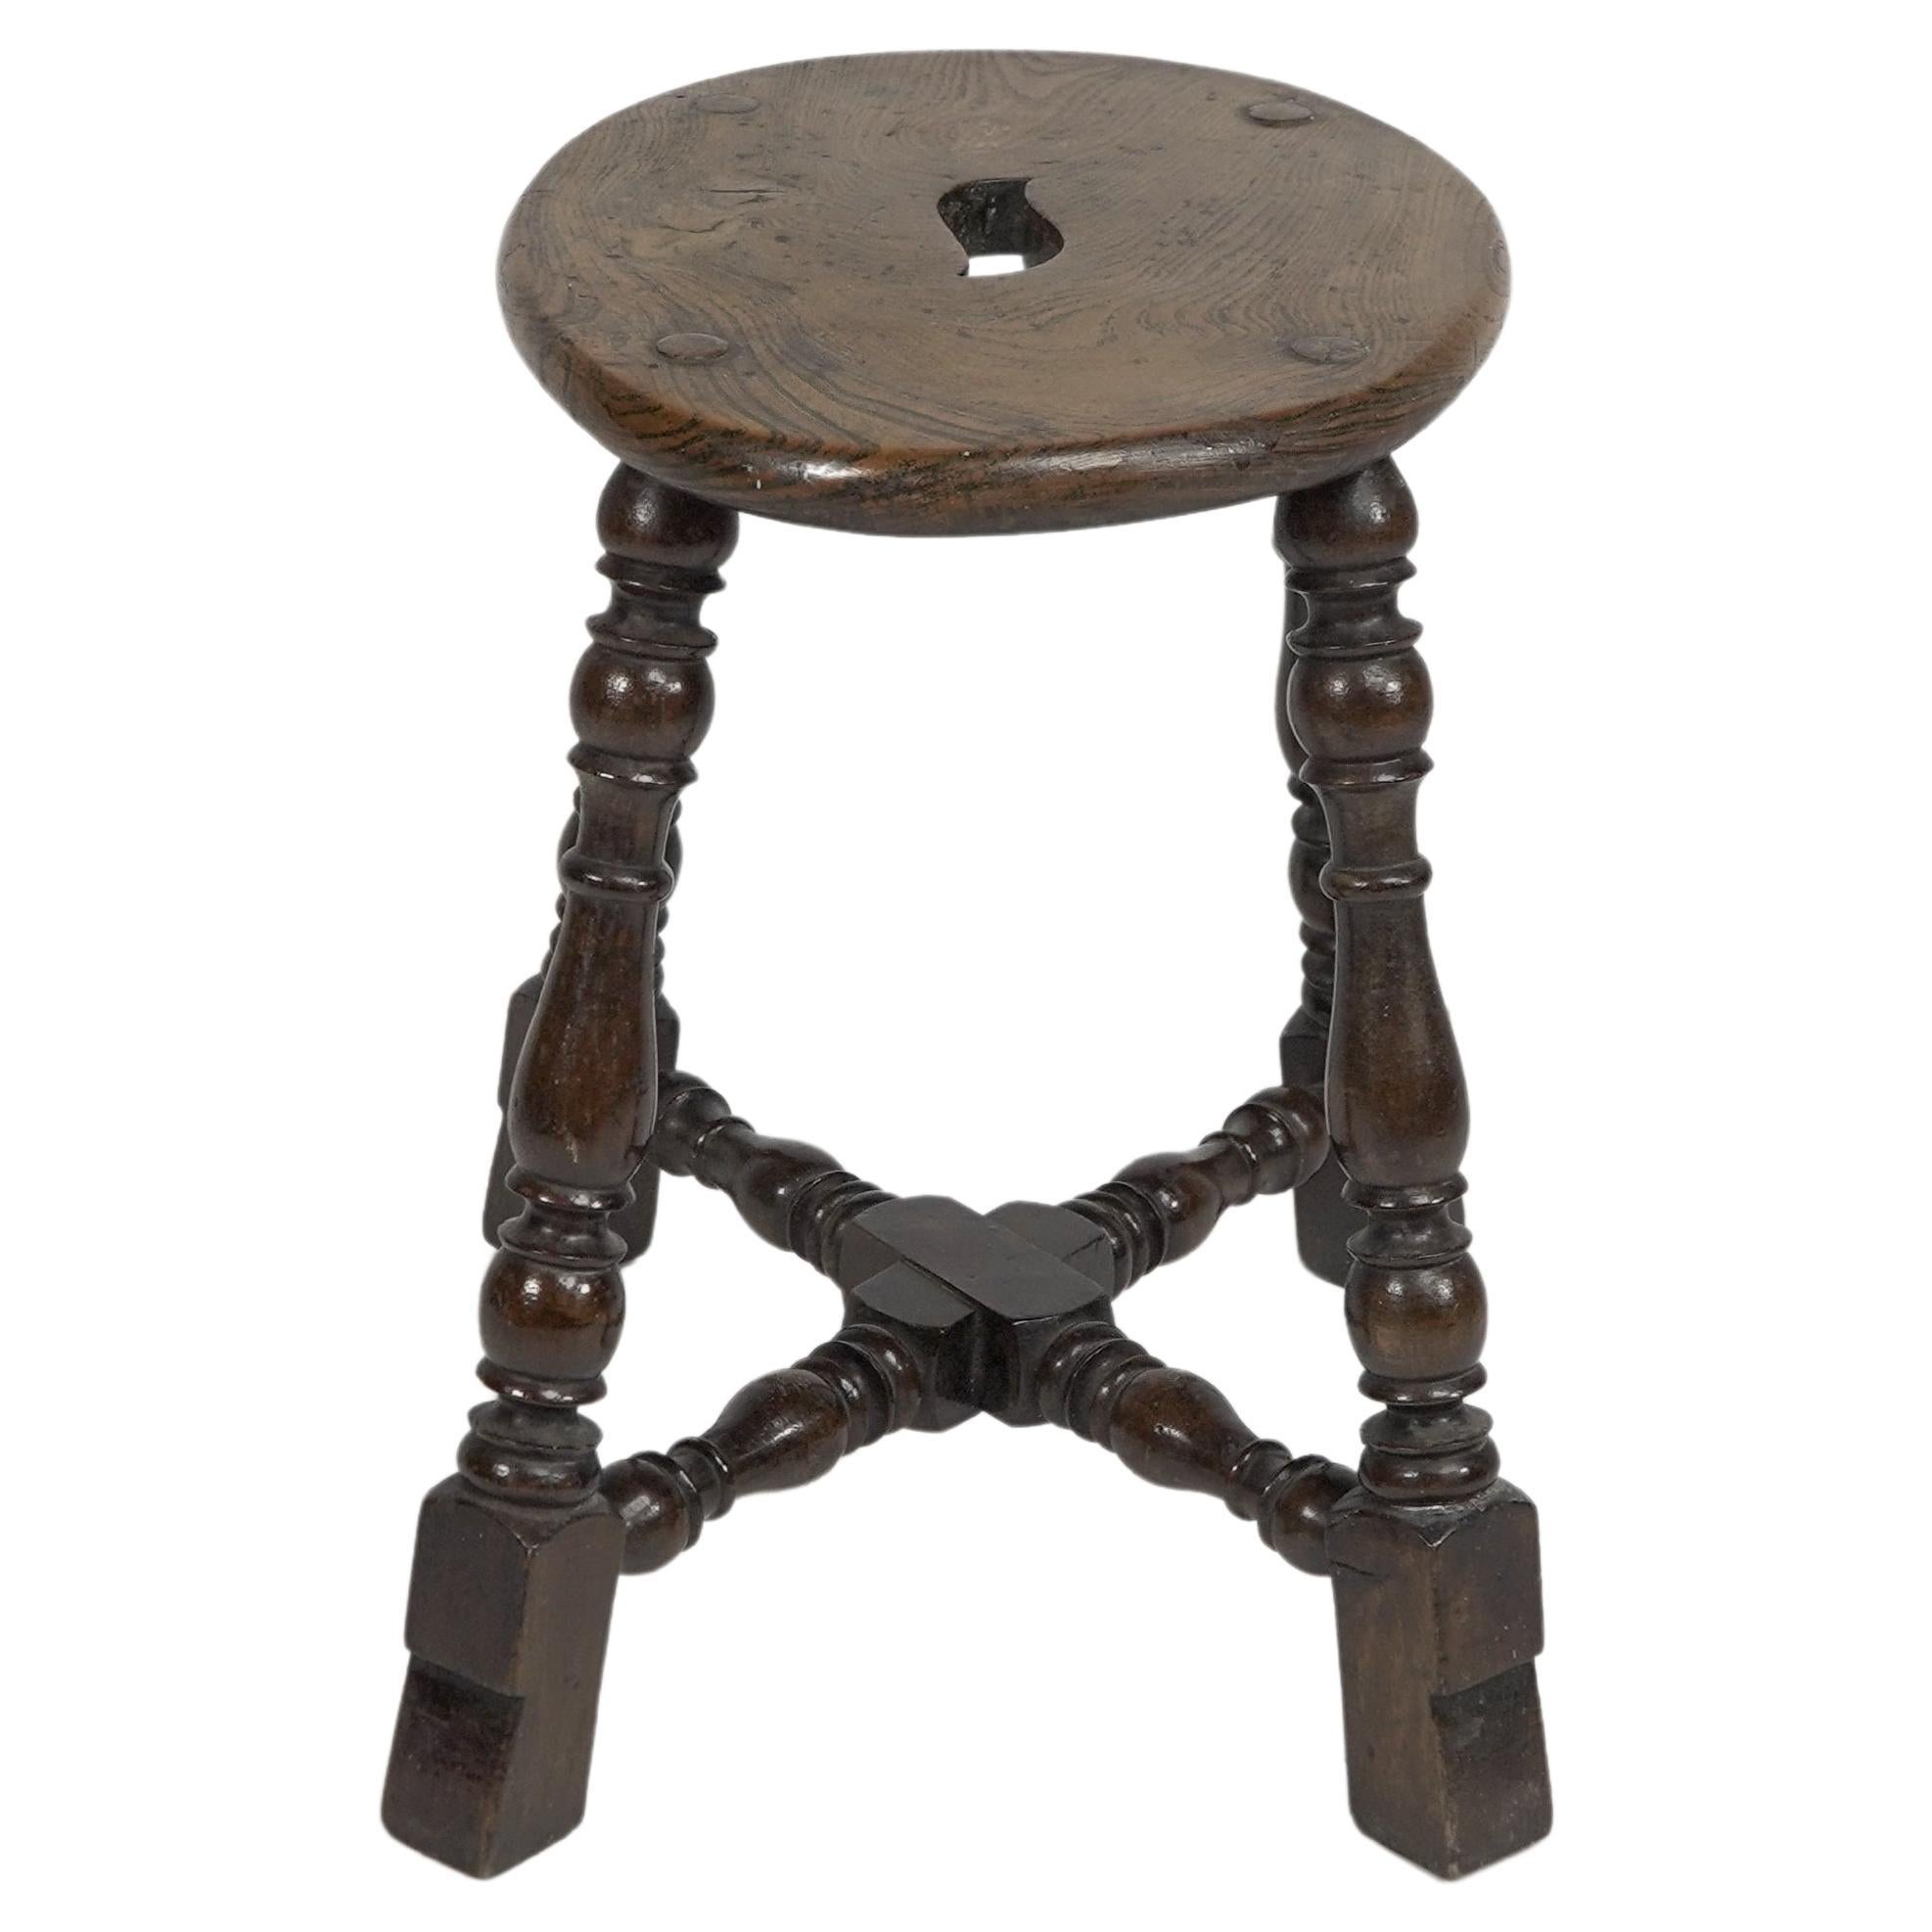 An Aesthetic Movement Elm stool with a 'S' handle, and a wild grain to the seat. For Sale